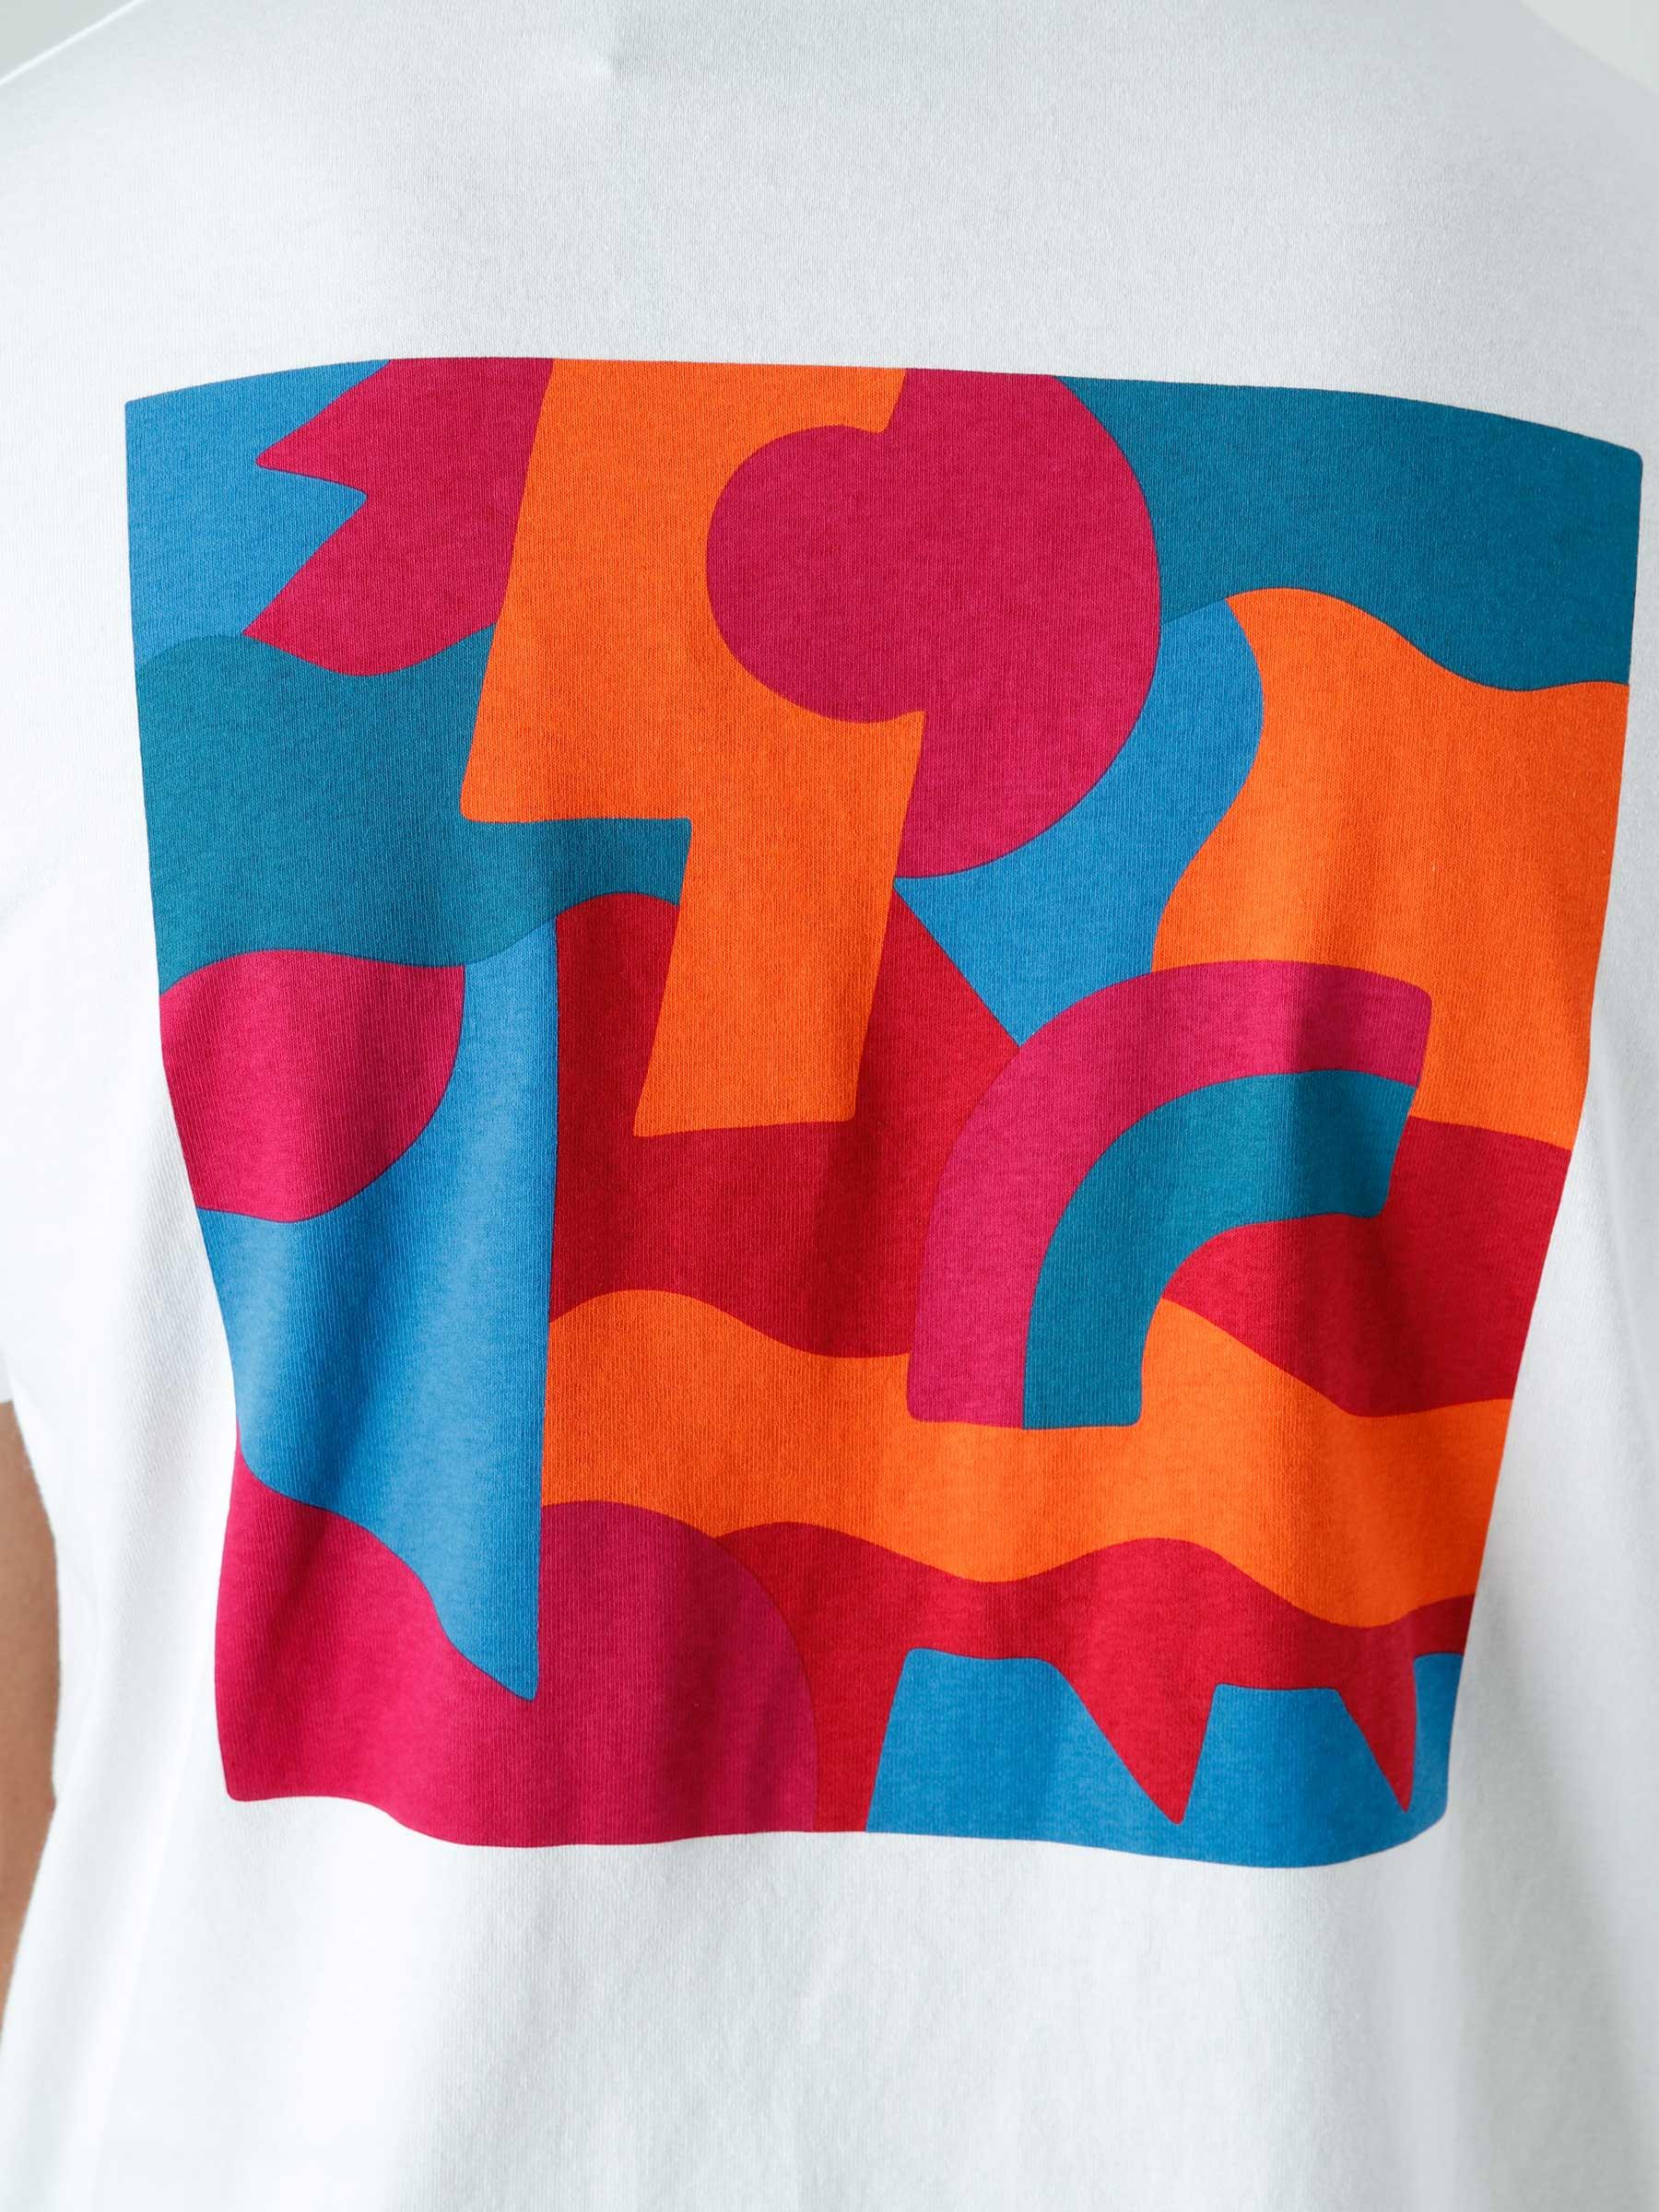 Abstract Shapes T-Shirt White 47515